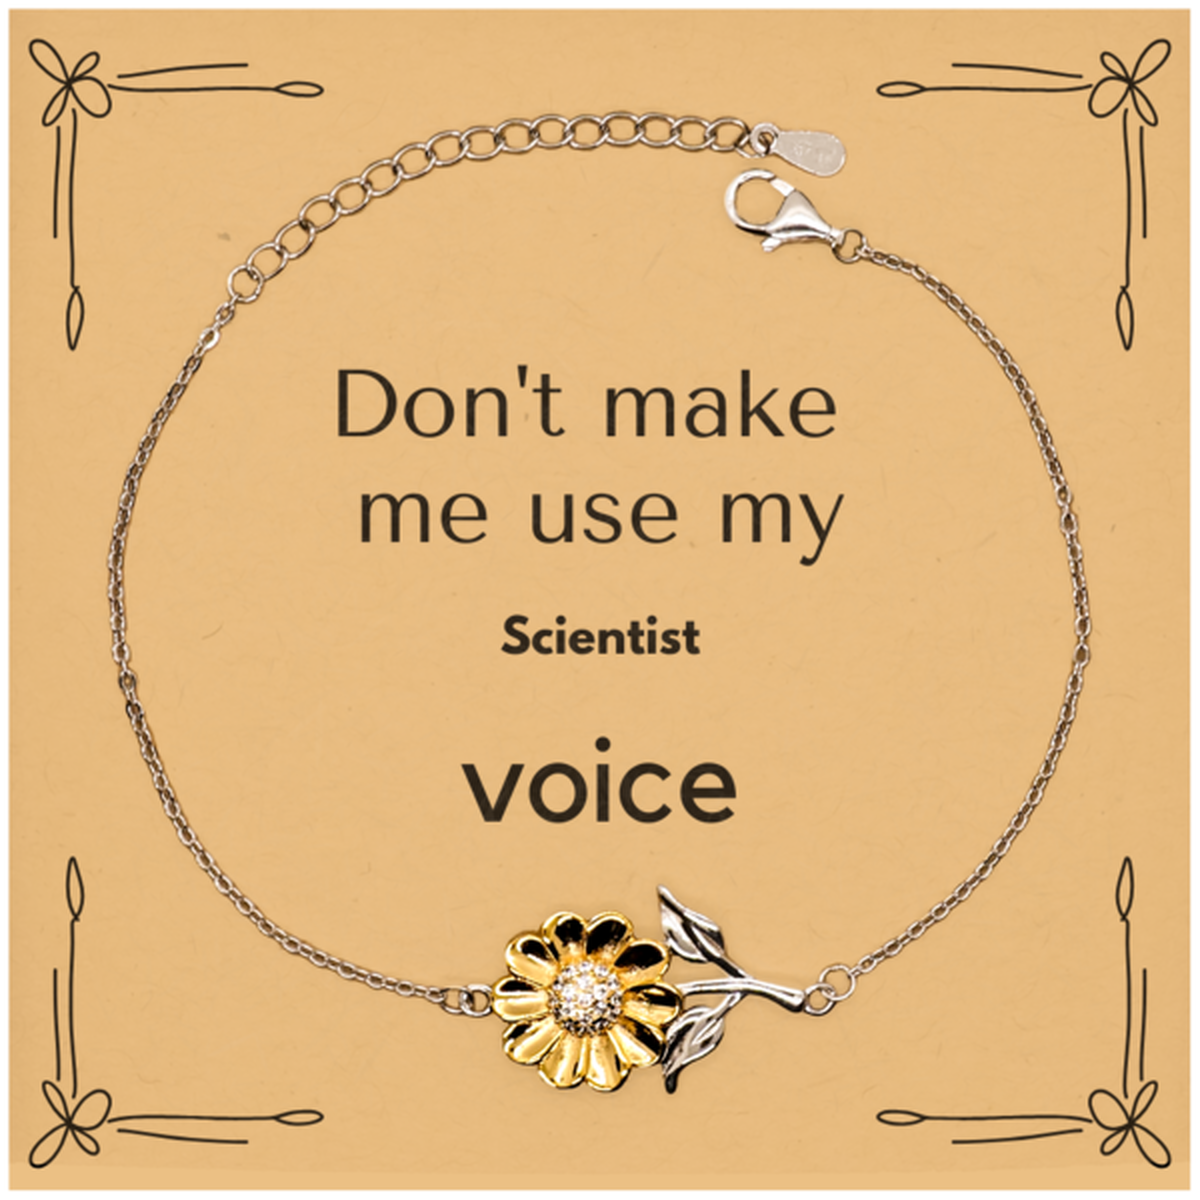 Don't make me use my Scientist voice, Sarcasm Scientist Card Gifts, Christmas Scientist Sunflower Bracelet Birthday Unique Gifts For Scientist Coworkers, Men, Women, Colleague, Friends